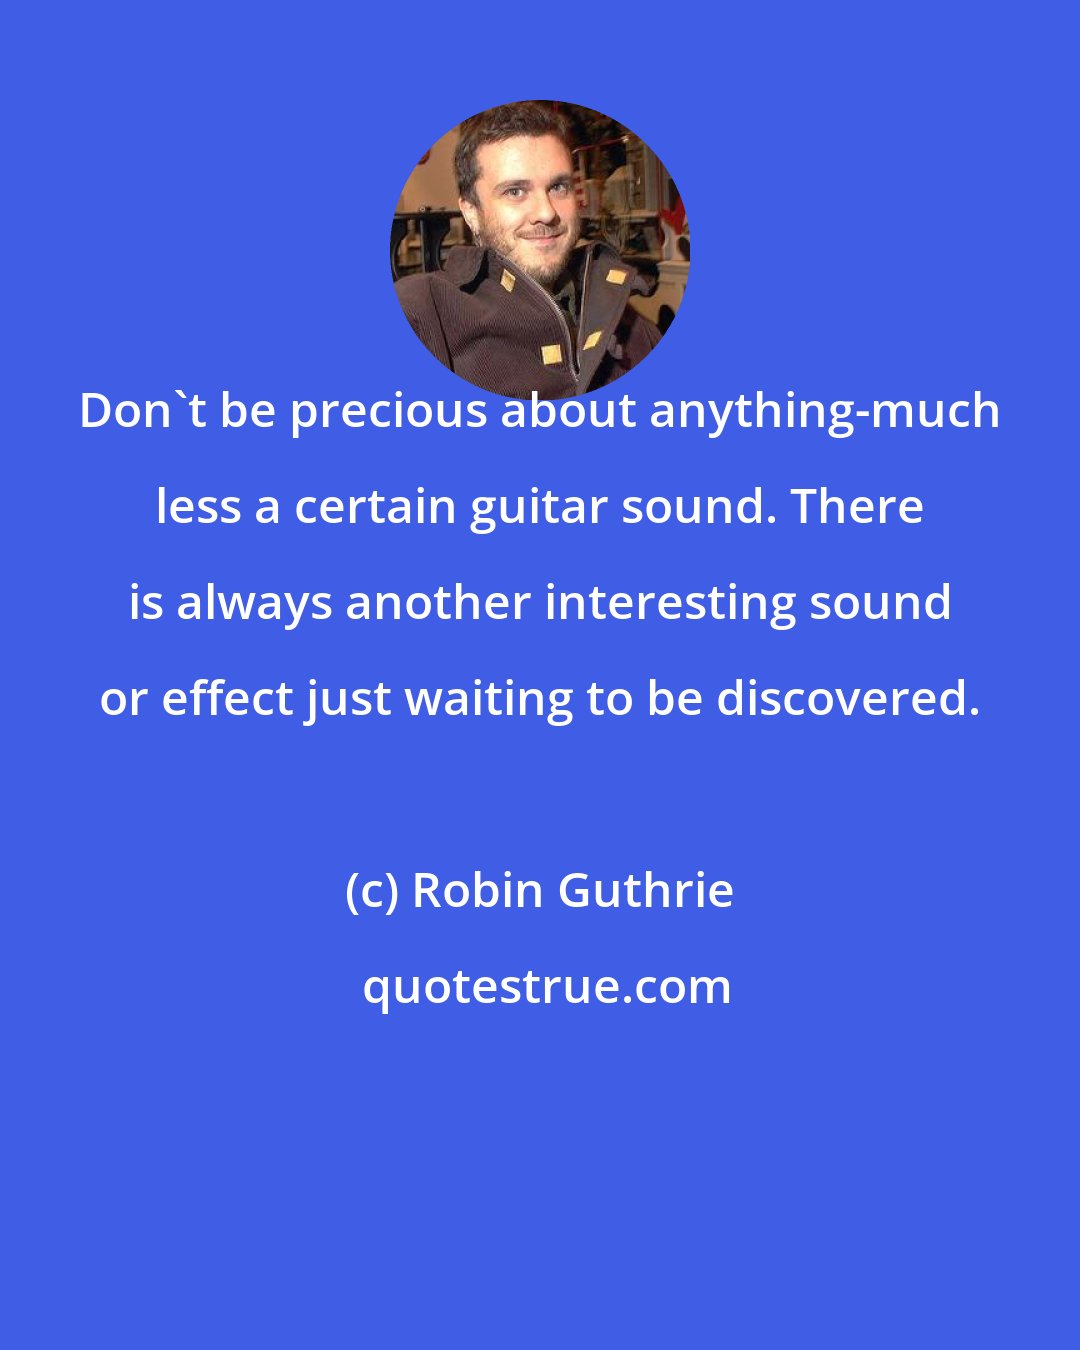 Robin Guthrie: Don't be precious about anything-much less a certain guitar sound. There is always another interesting sound or effect just waiting to be discovered.